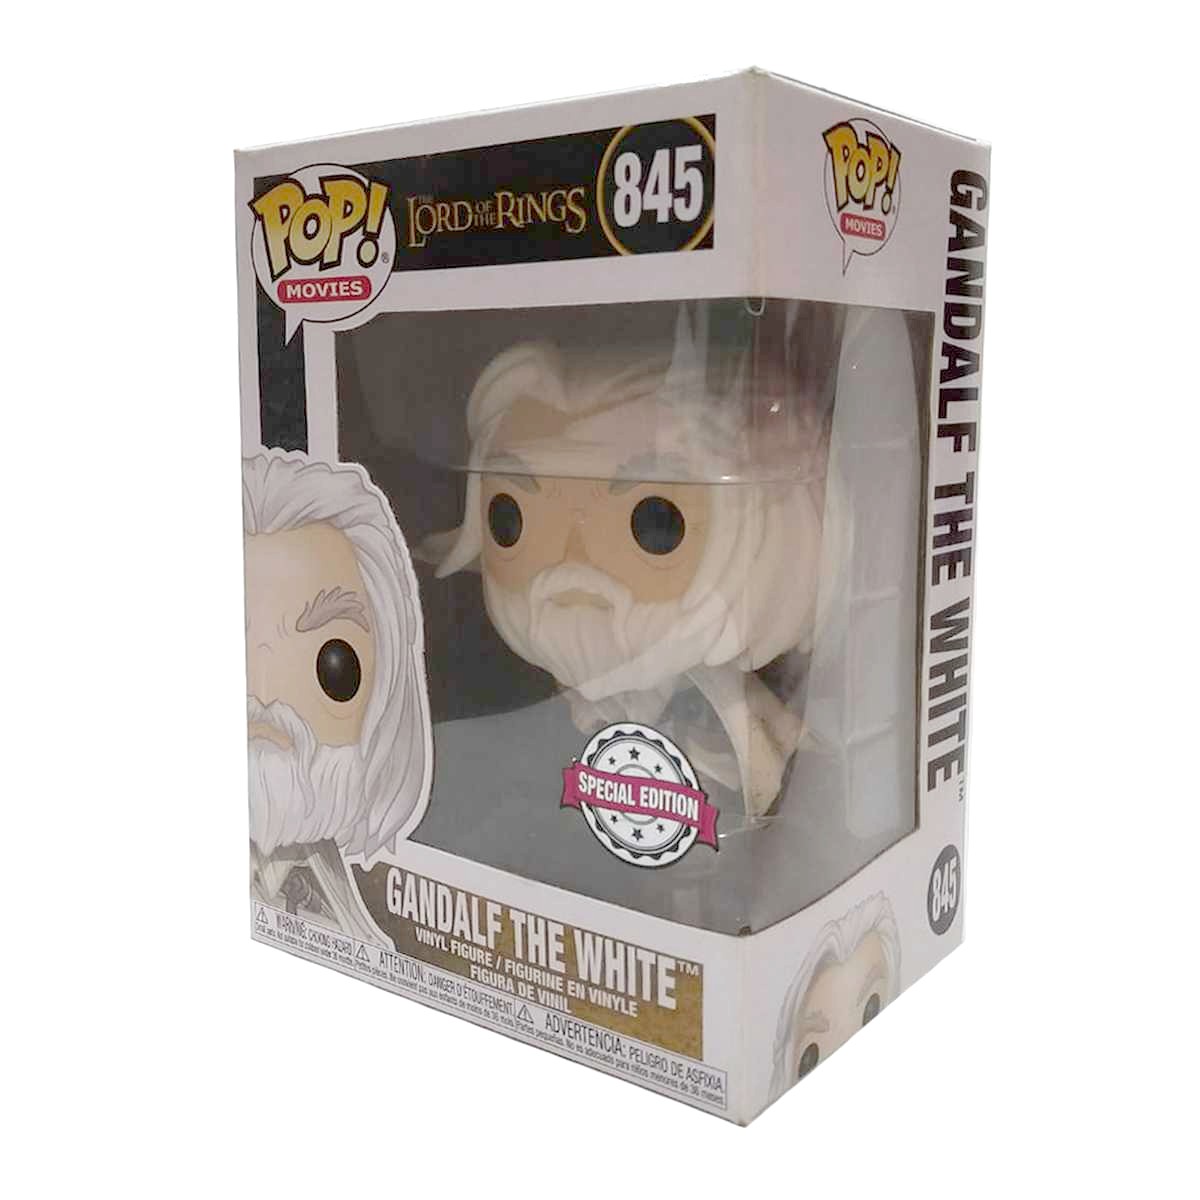 Funko Pop! Movies The Lord of the Rings Gandalf The White vinyl figure número 845